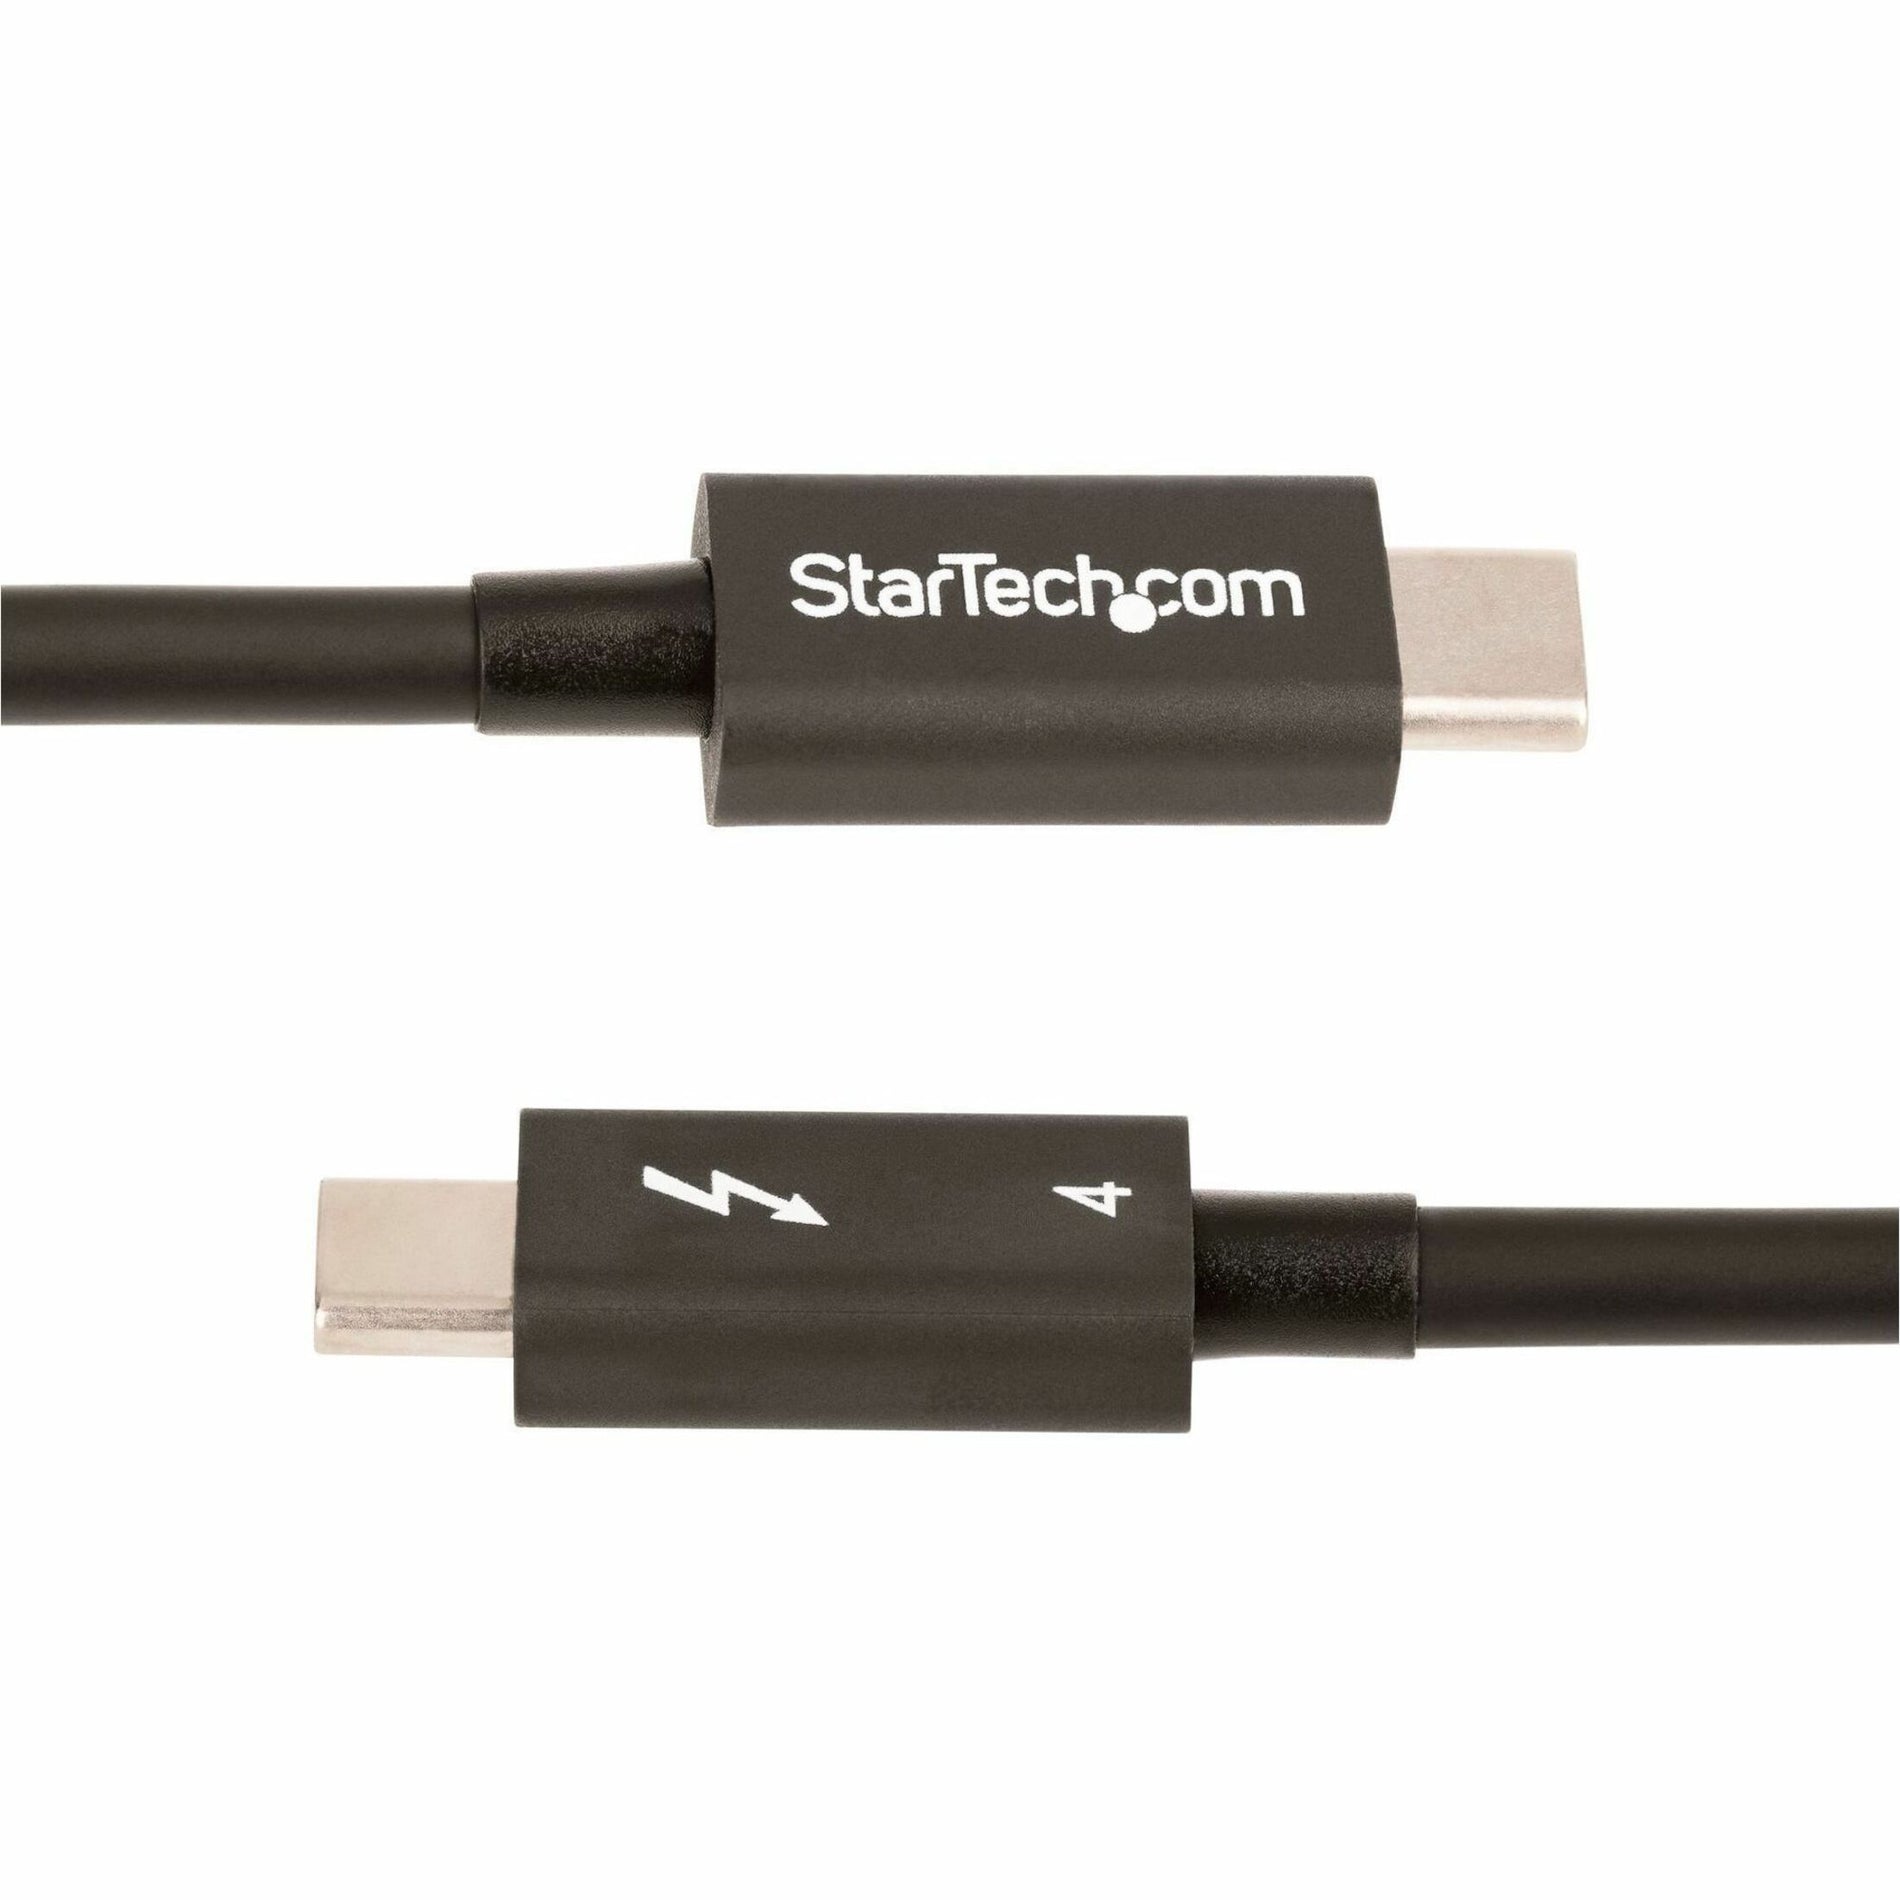 StarTech.com TBLT4MM1M Thunderbolt 4 Audio/Video Cable, 3 ft, 40 Gbit/s Data Transfer Rate, 7680 x 4320 Supported Resolution